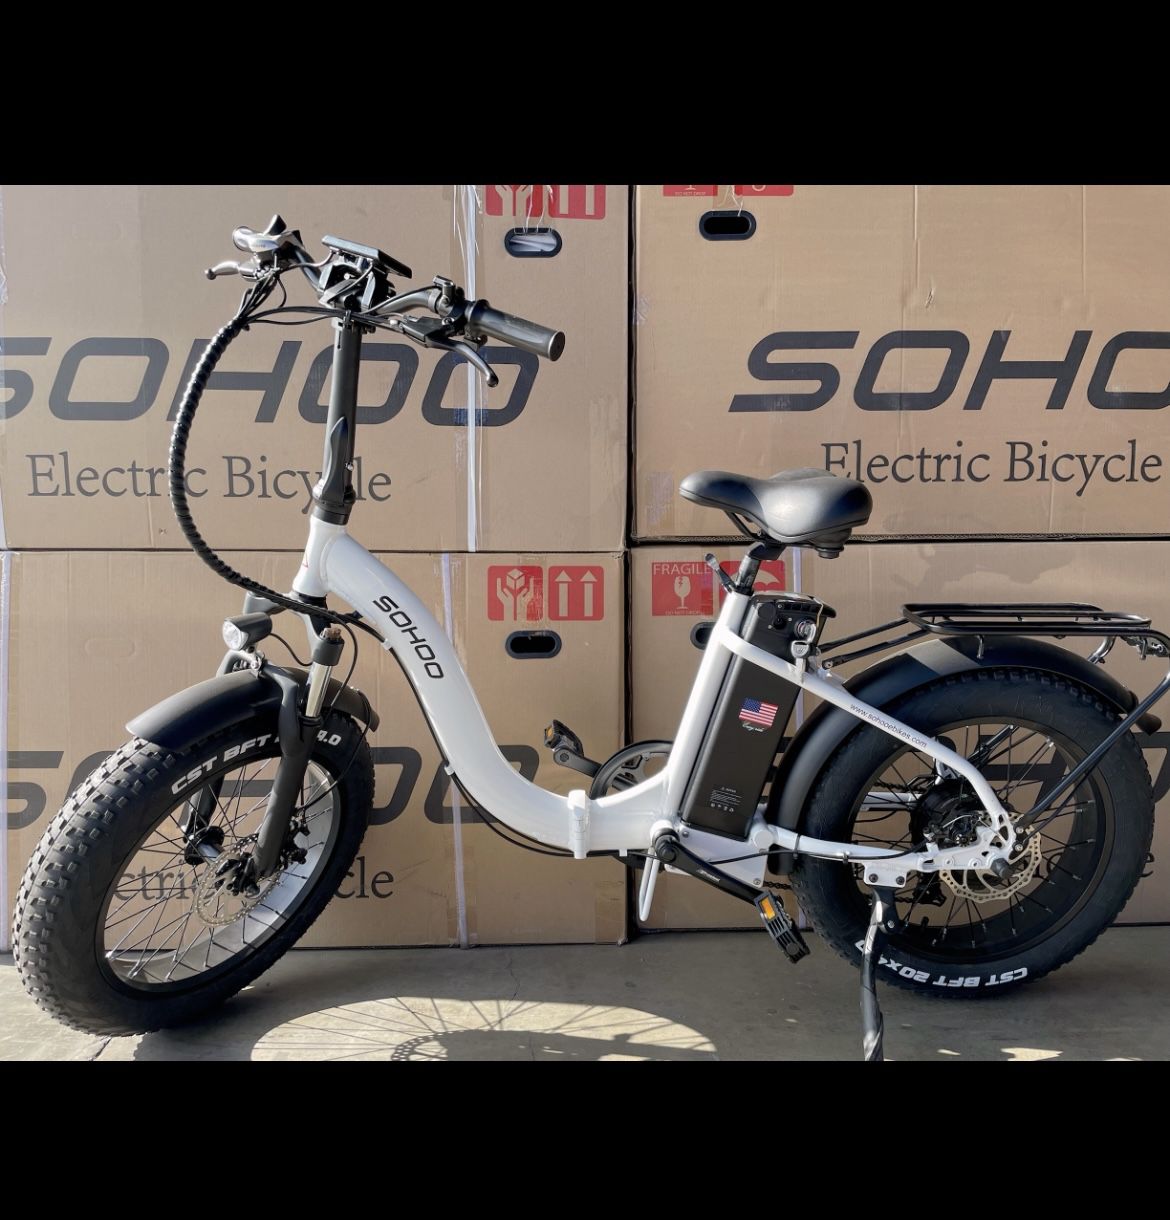 Amazing Electric Bicycles On ISale, 10+ Models, Used&New $1199-$1549